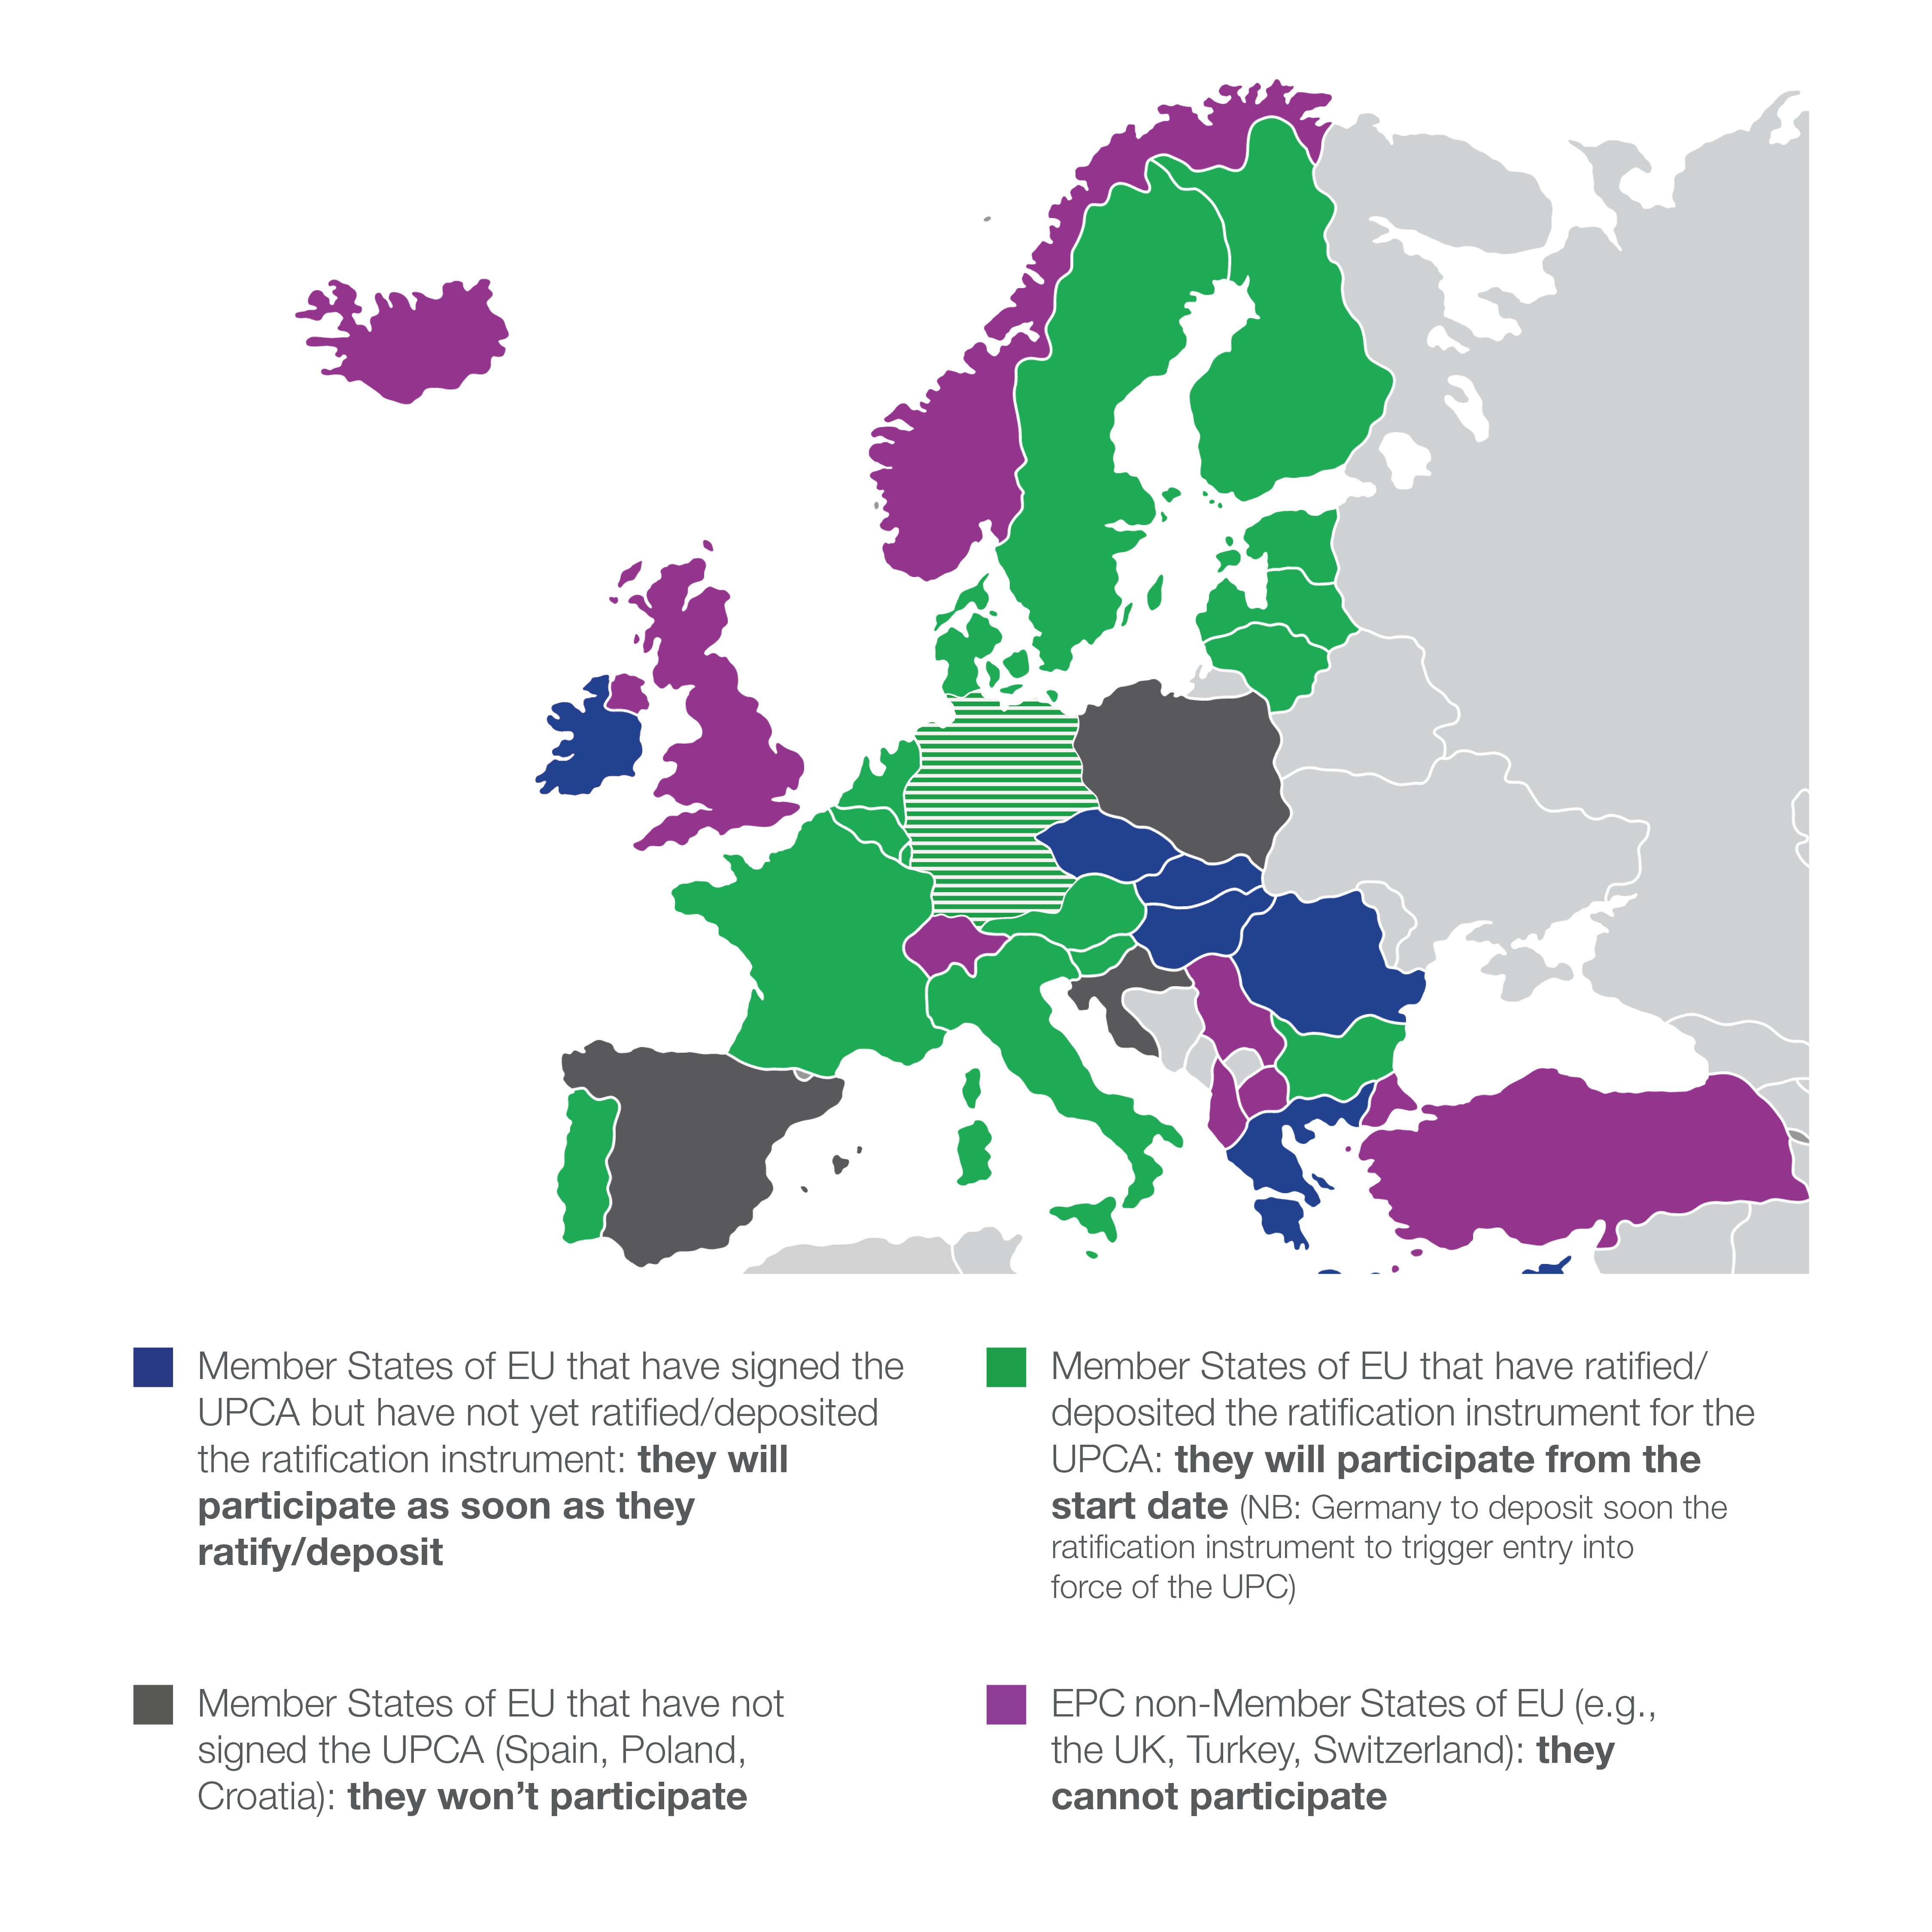 Current geographical overview of the Member States participation status